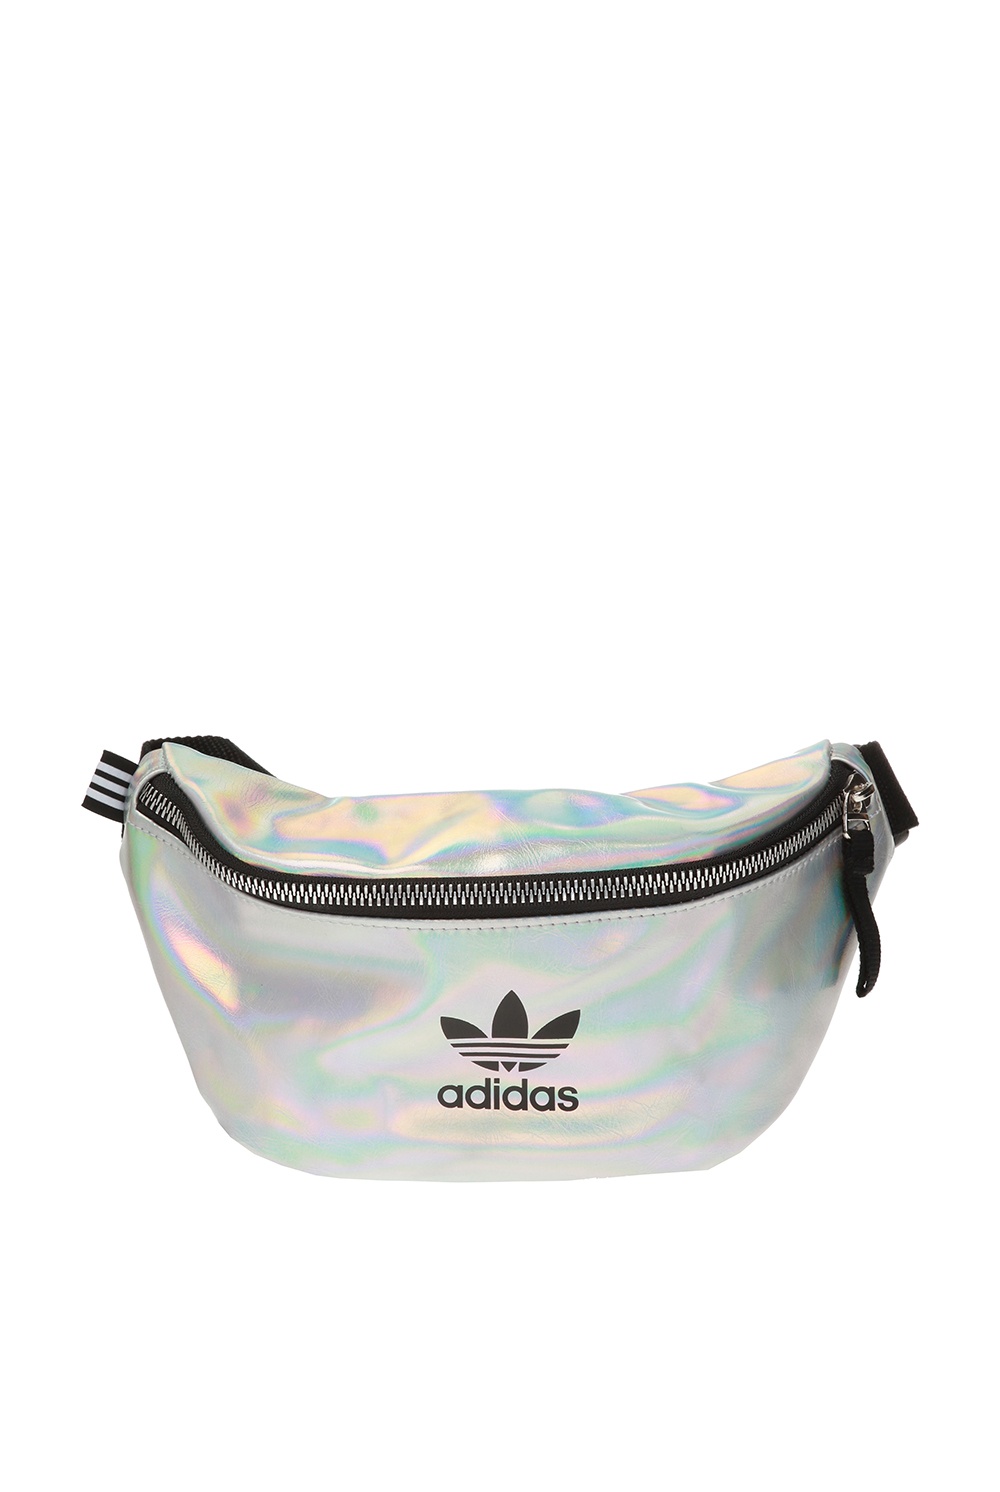 adidas holographic fanny pack